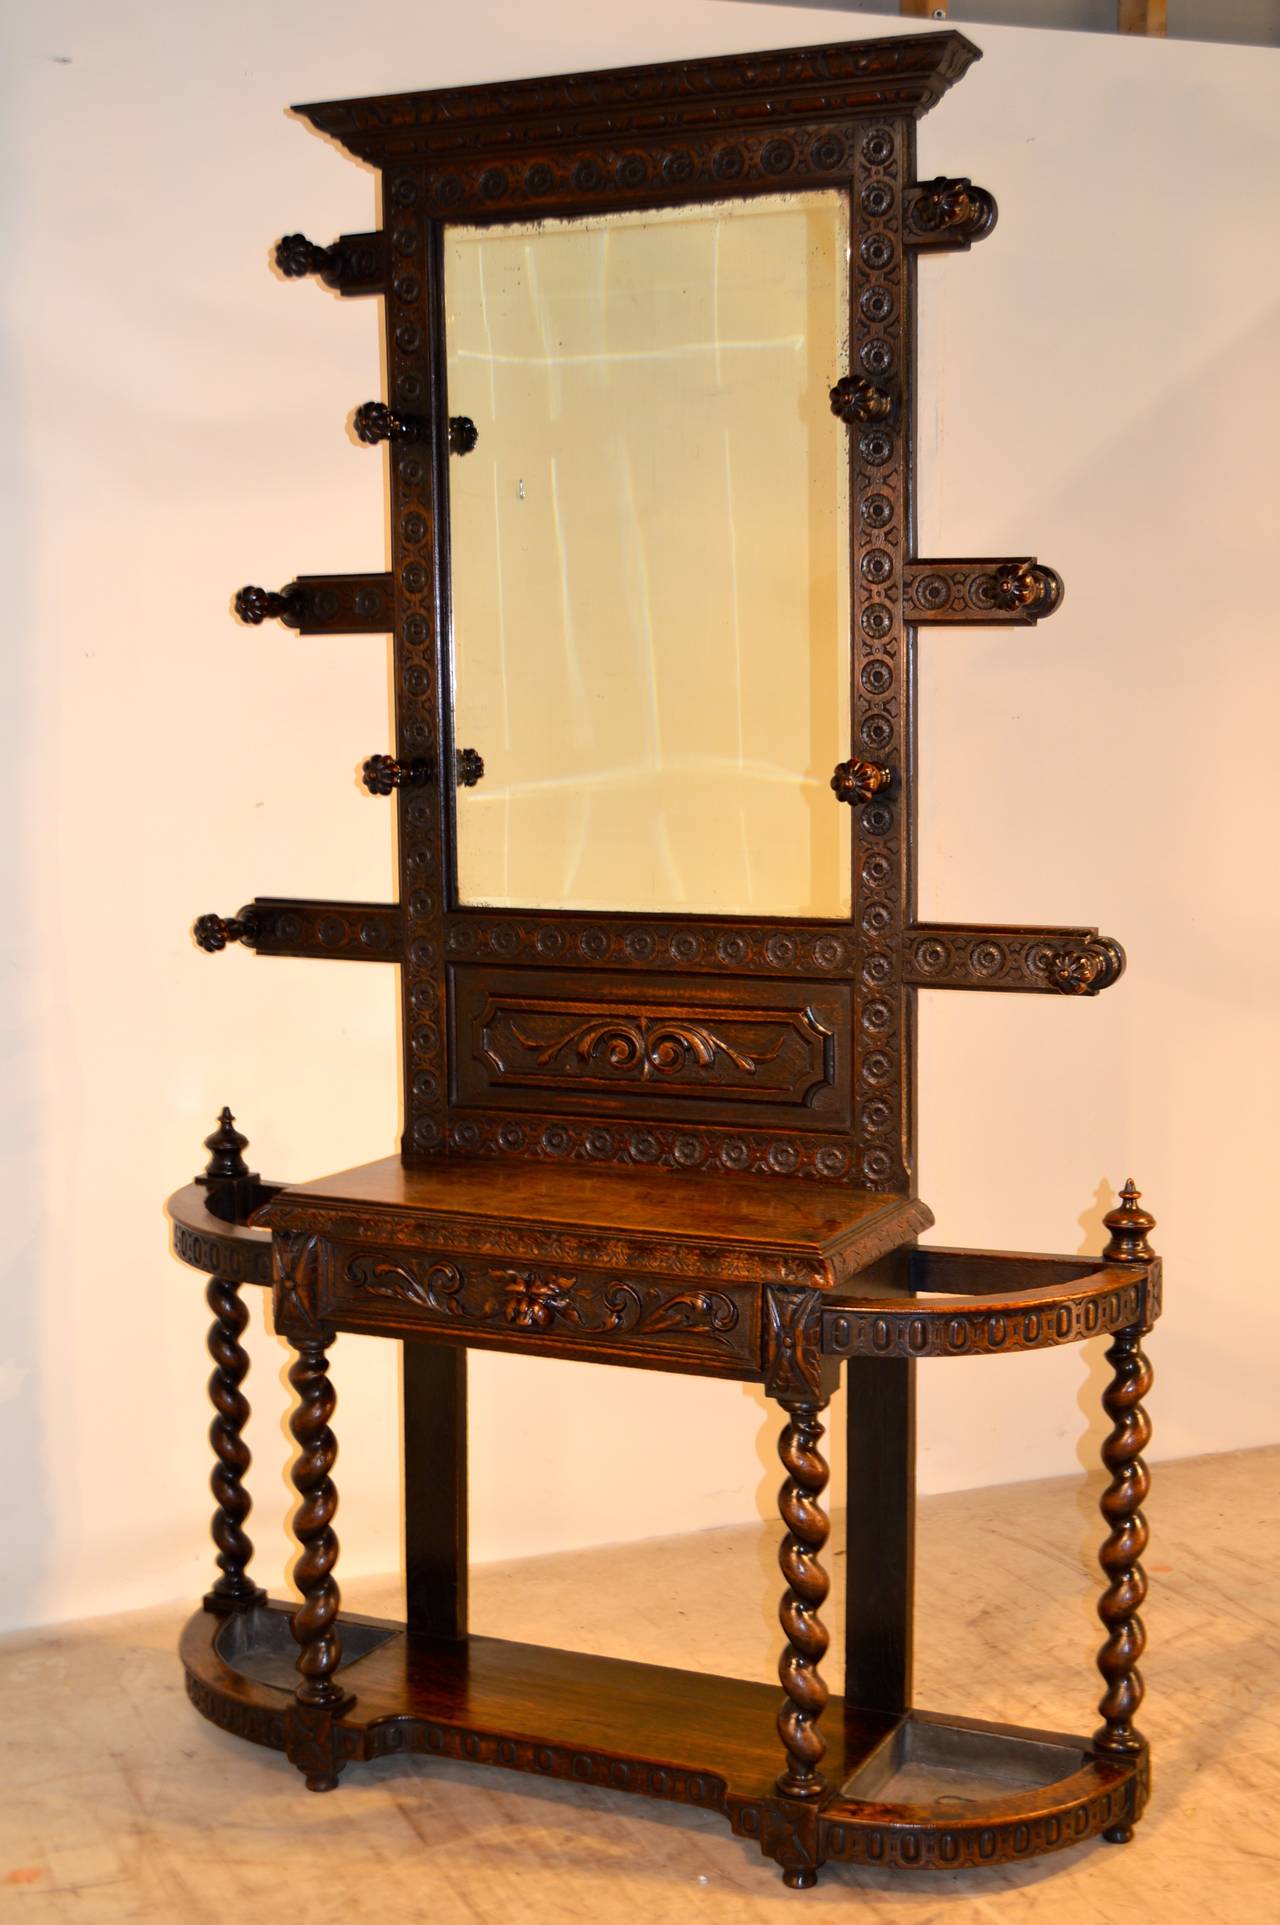 19th-C. English oak hall stand of exceptional quality. The top has a crown molding over a central framed mirror, flanked by turned and reeded hat and coat hooks, following down to a base with a central glove drawer, which is flanked by two cane and